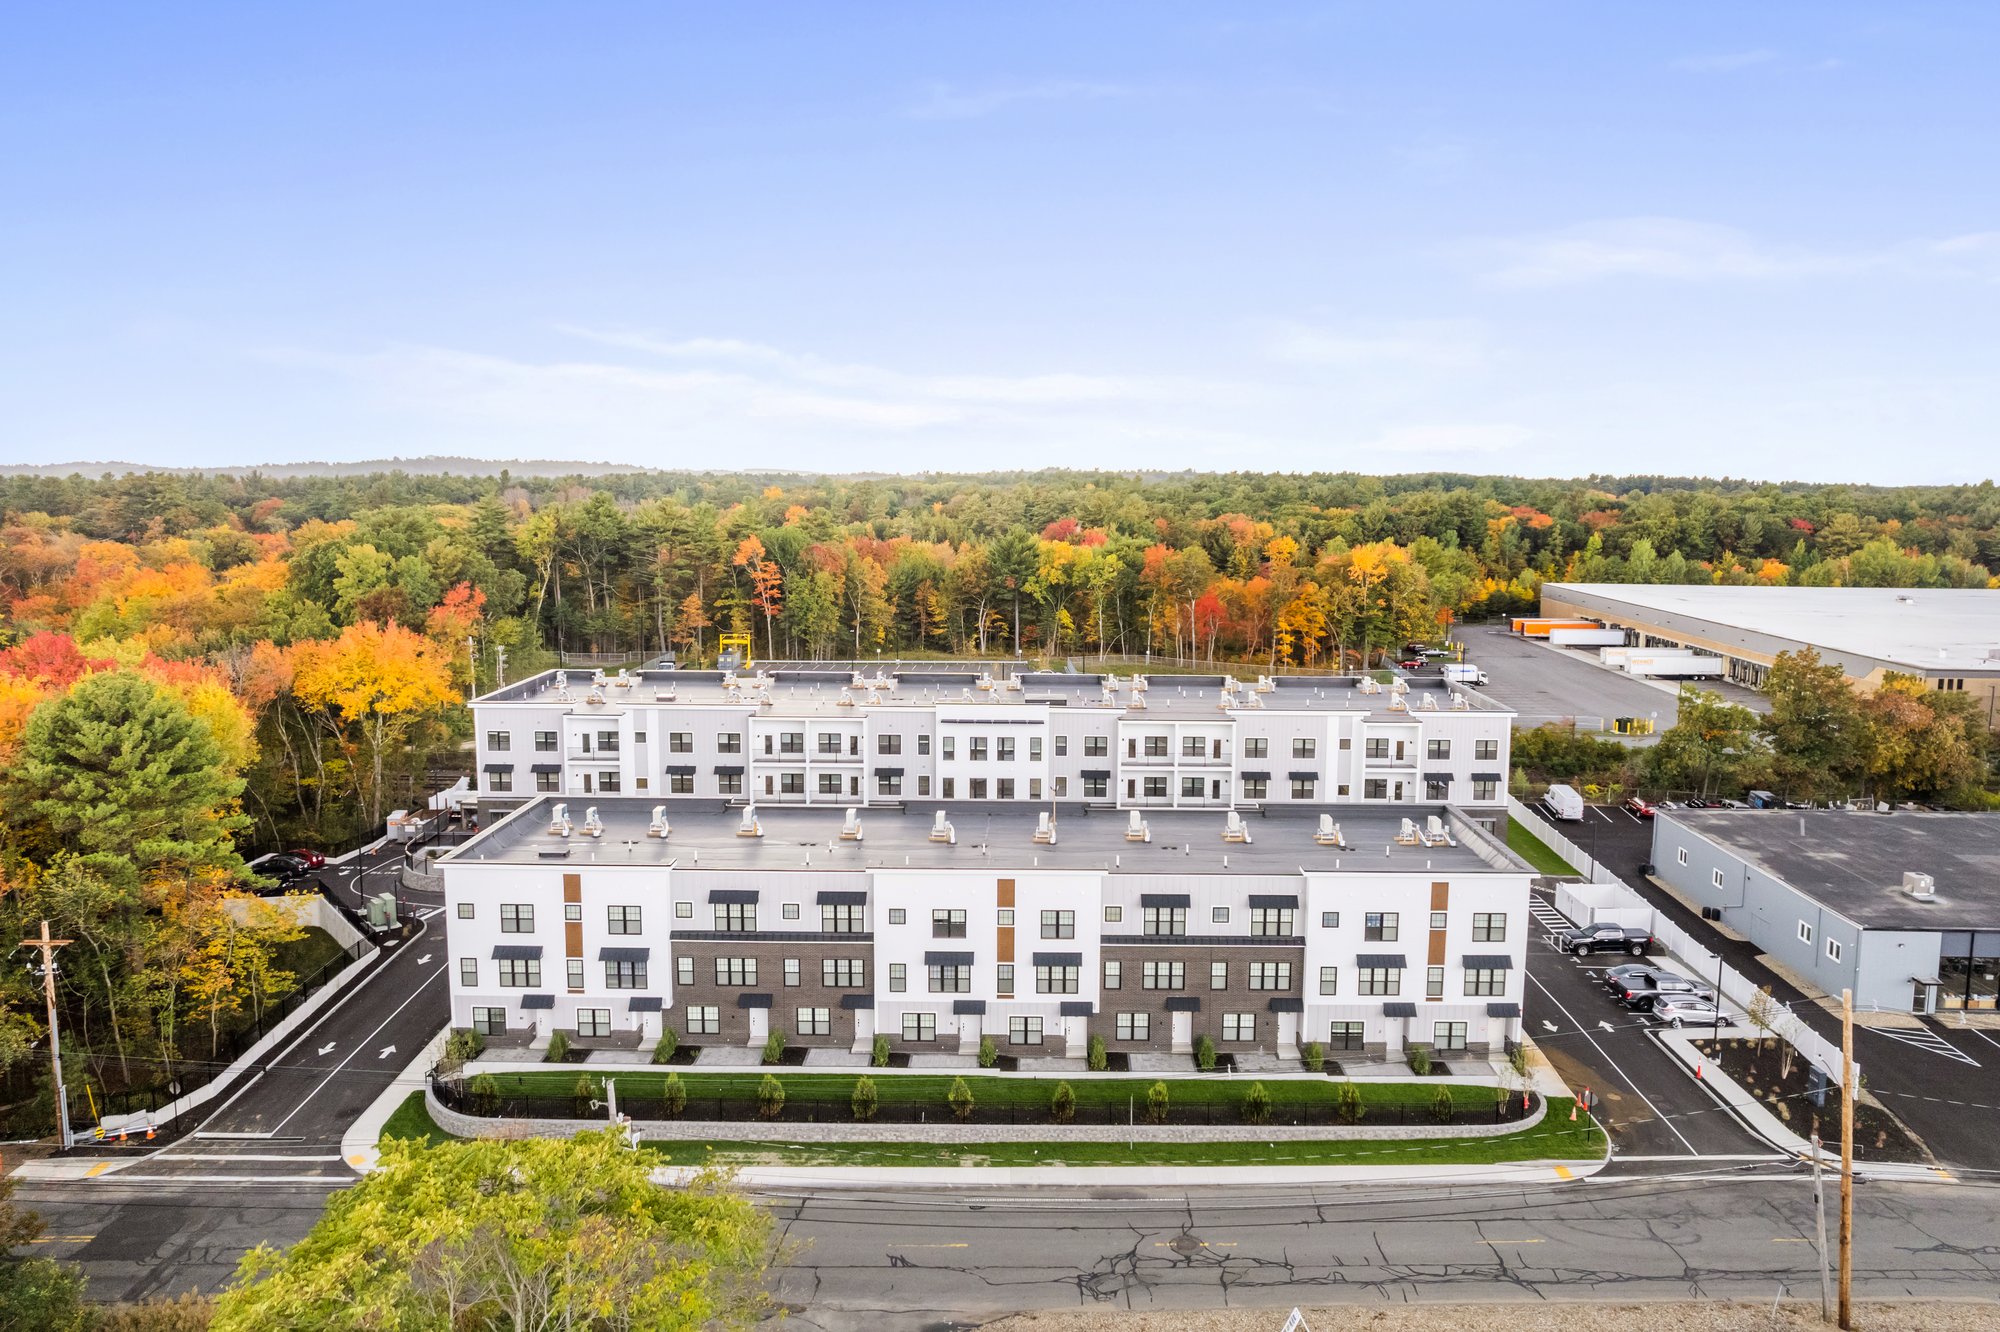 Exterior of Lume apartments in Wilmington, MA